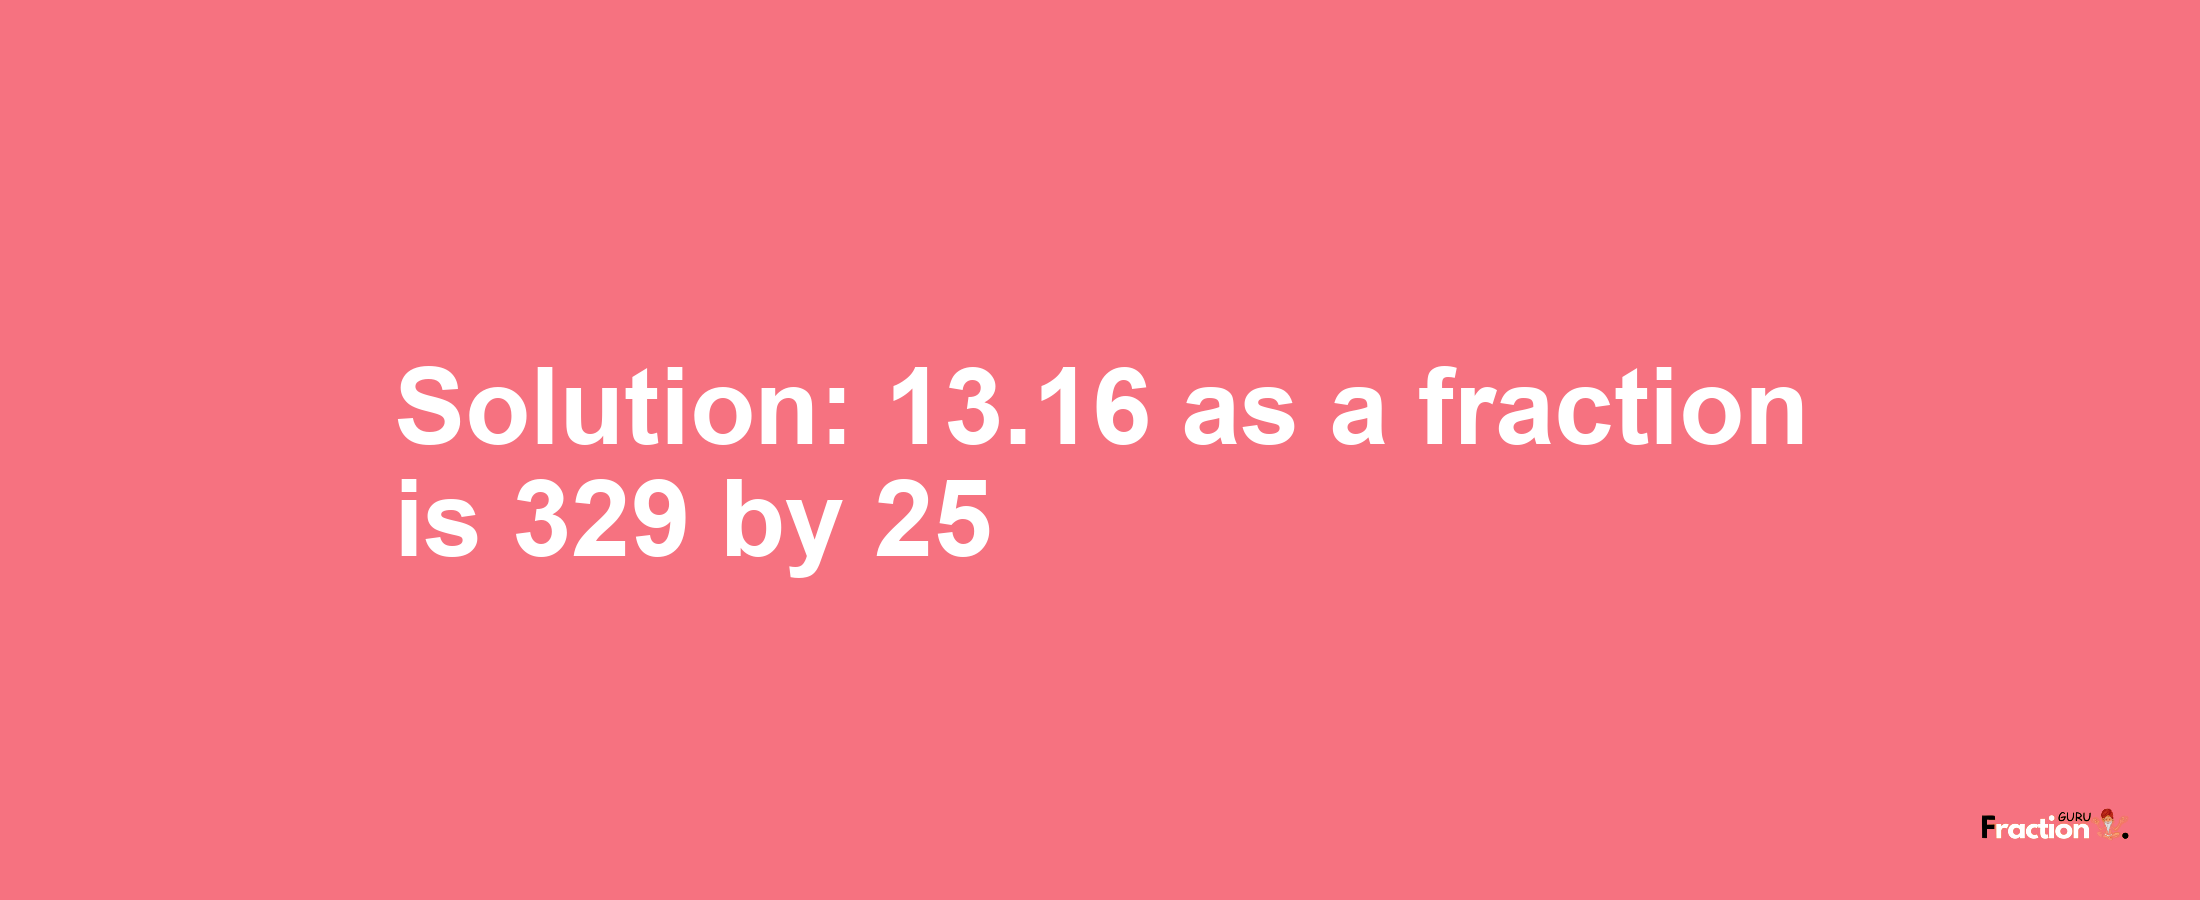 Solution:13.16 as a fraction is 329/25